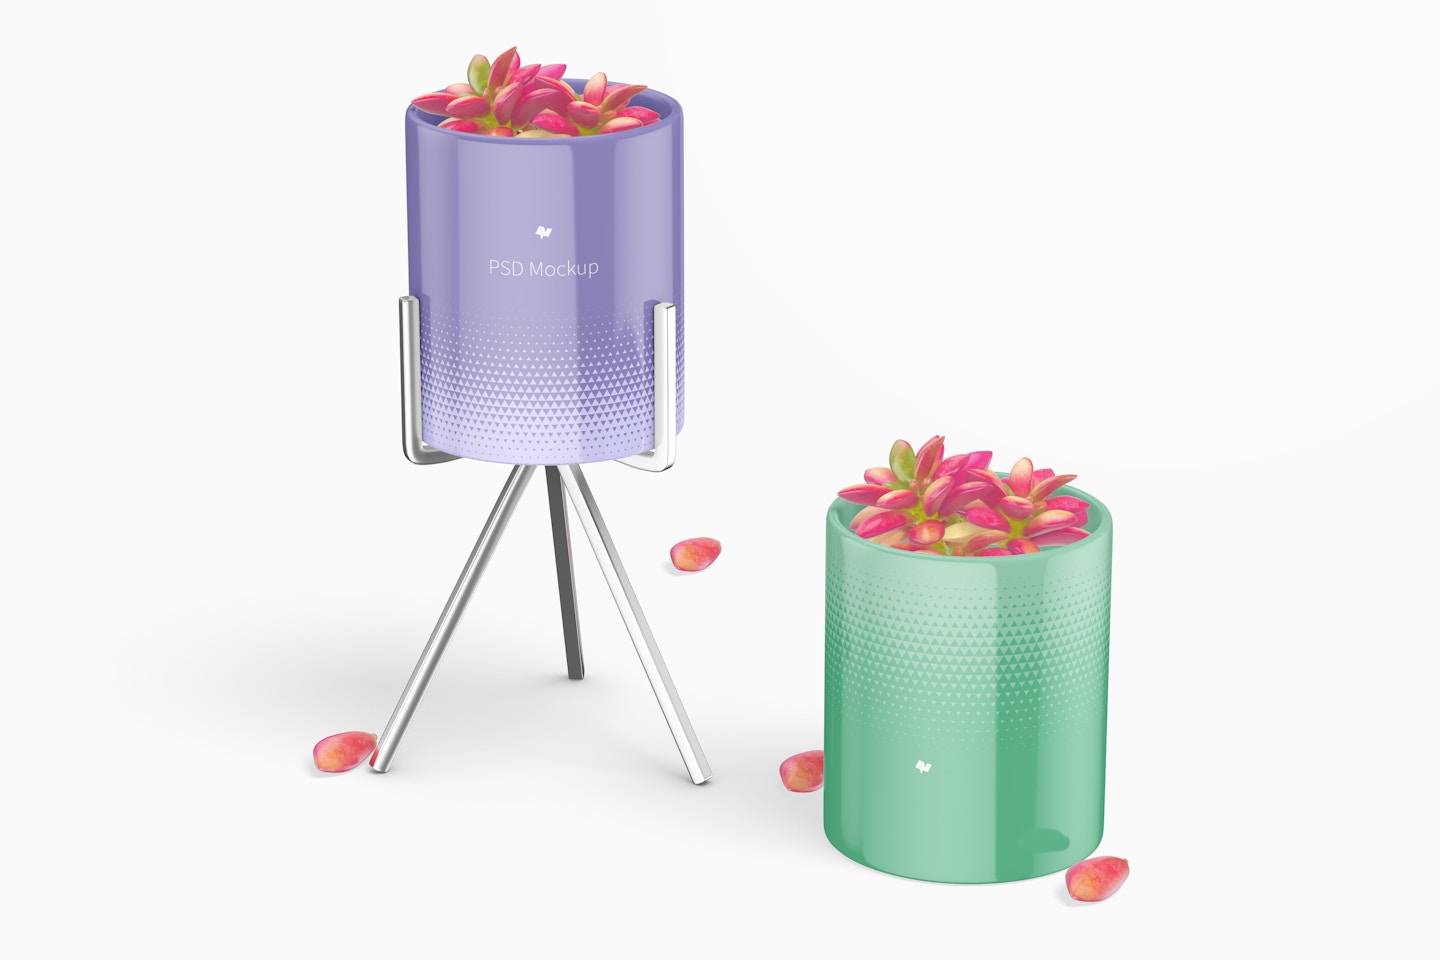 Flower Pot with Metal Stand Mockup